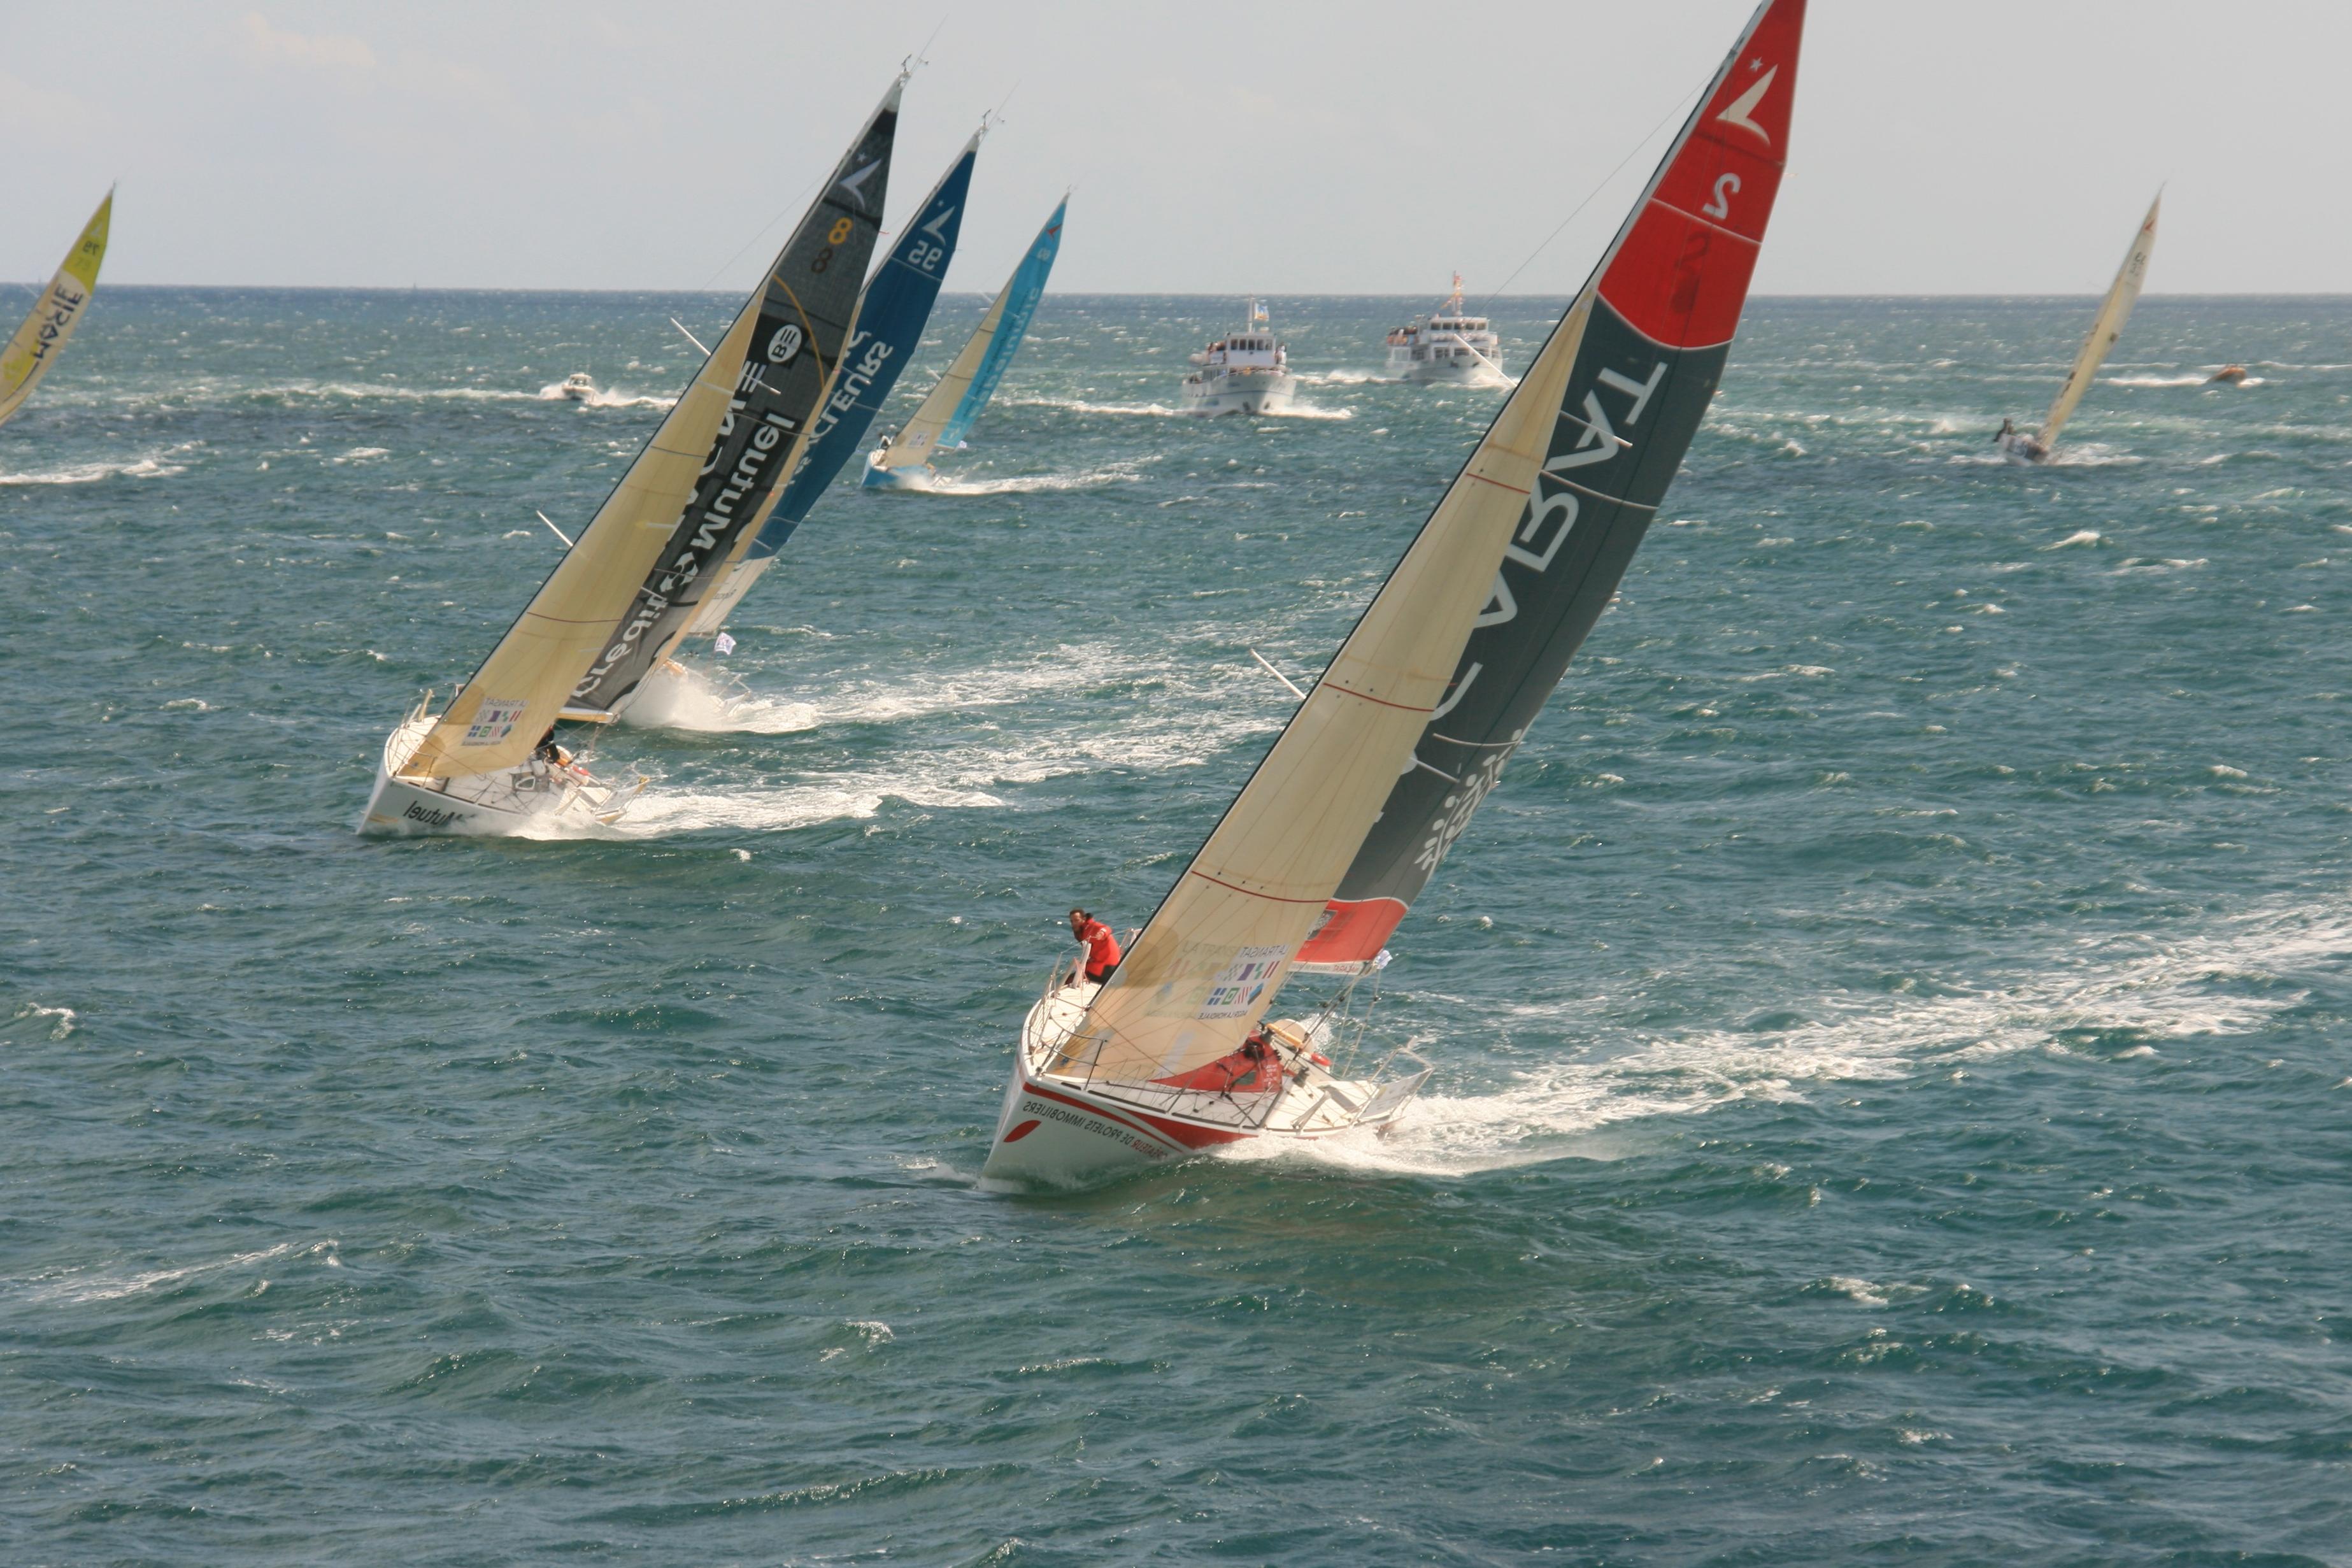 Free picture: water, watercraft, race, competition, sport, sailboat ...